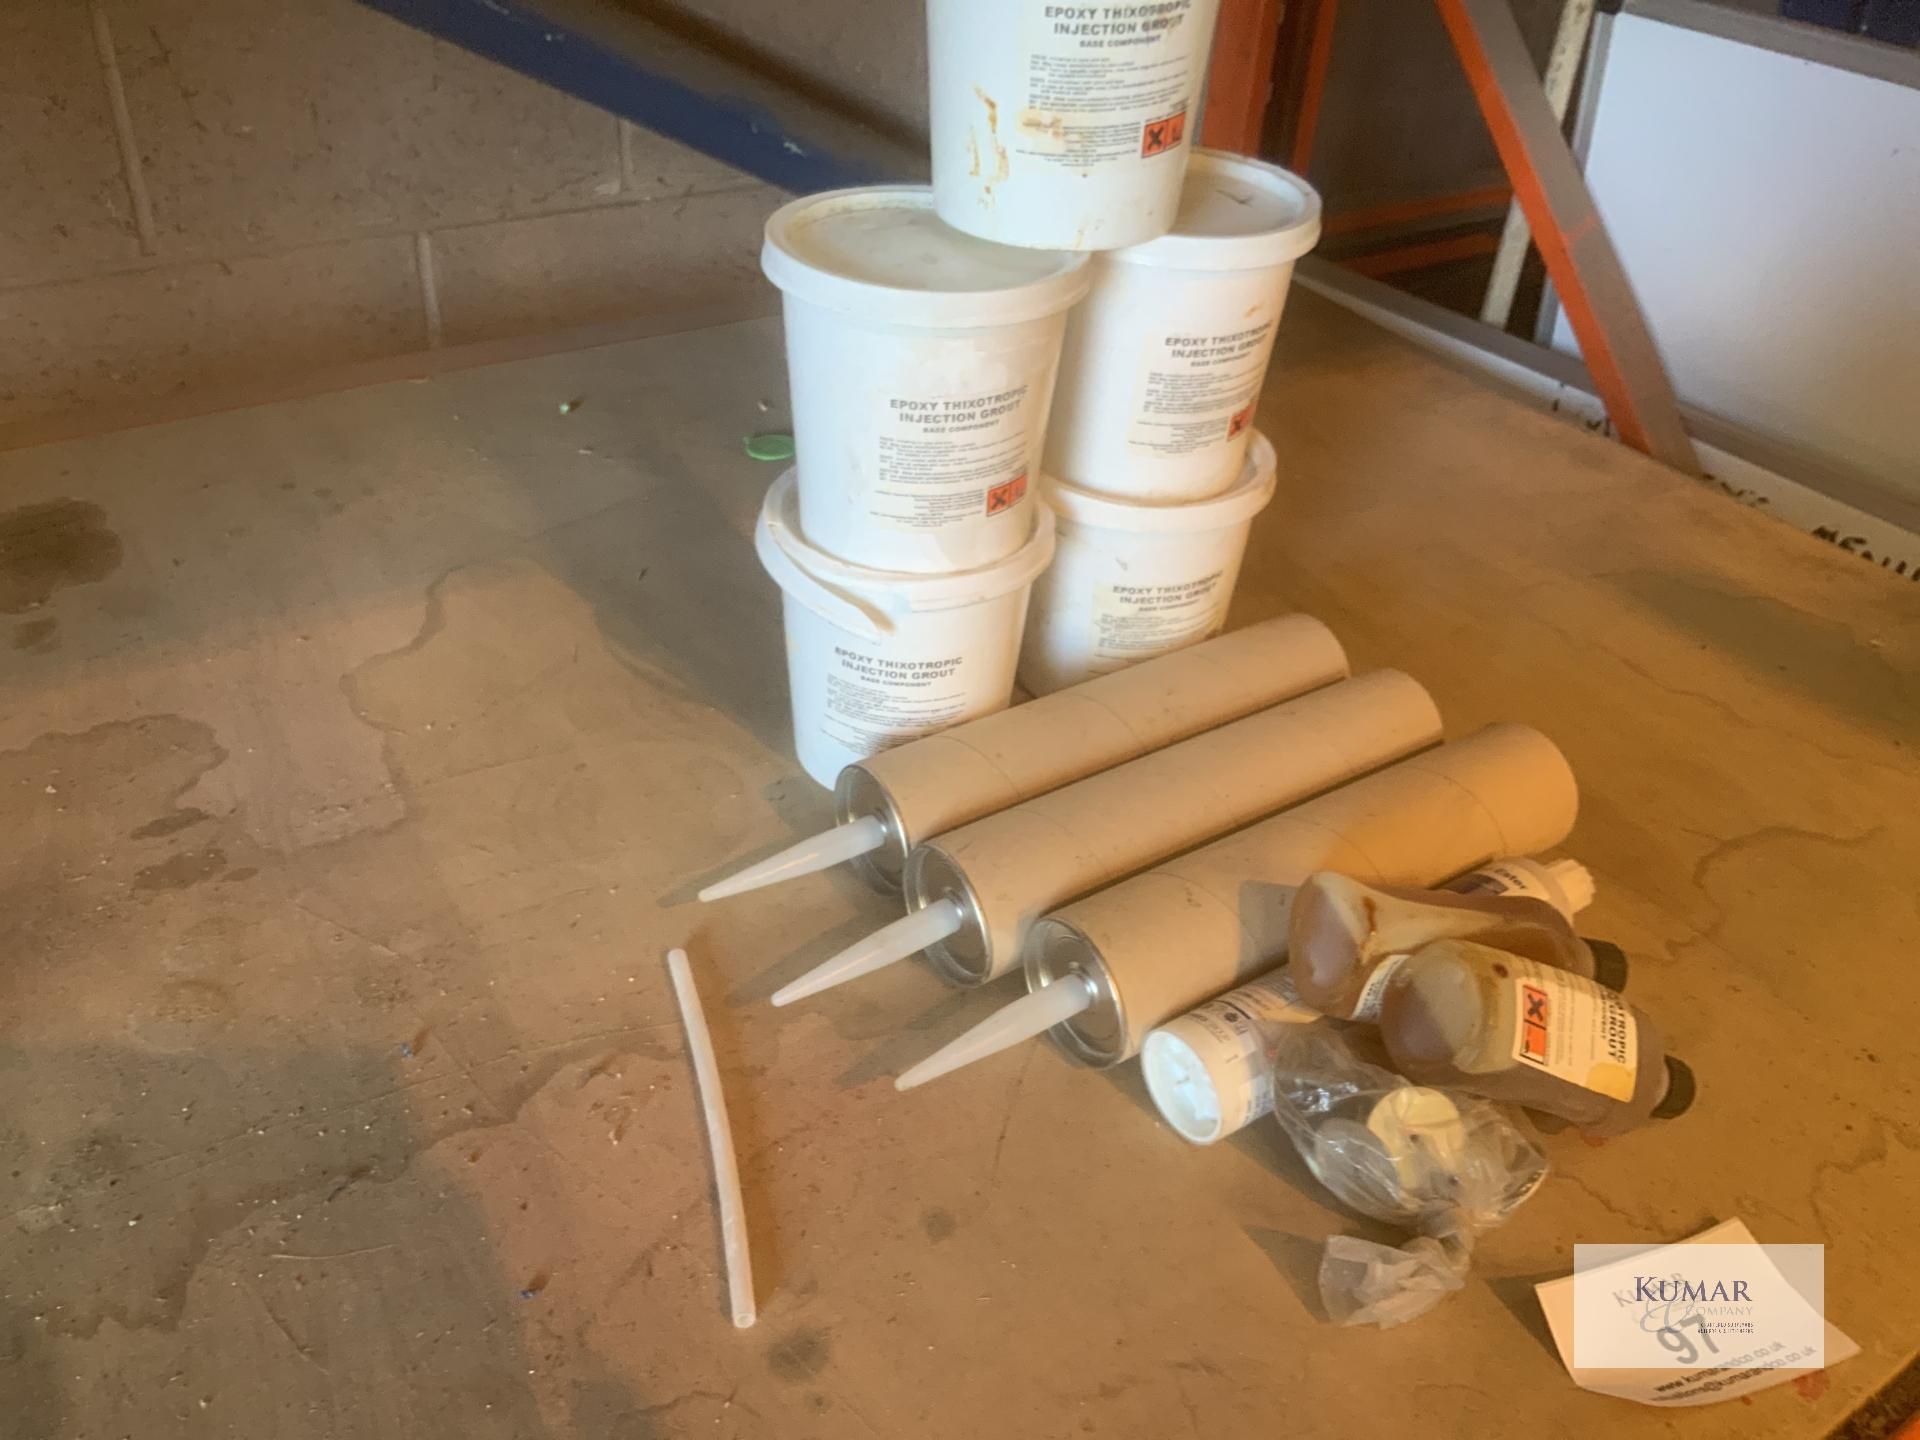 Epoxy thixoppic injection grout and applicator accessories - Ignore Lot 97 Ticket - Image 2 of 3